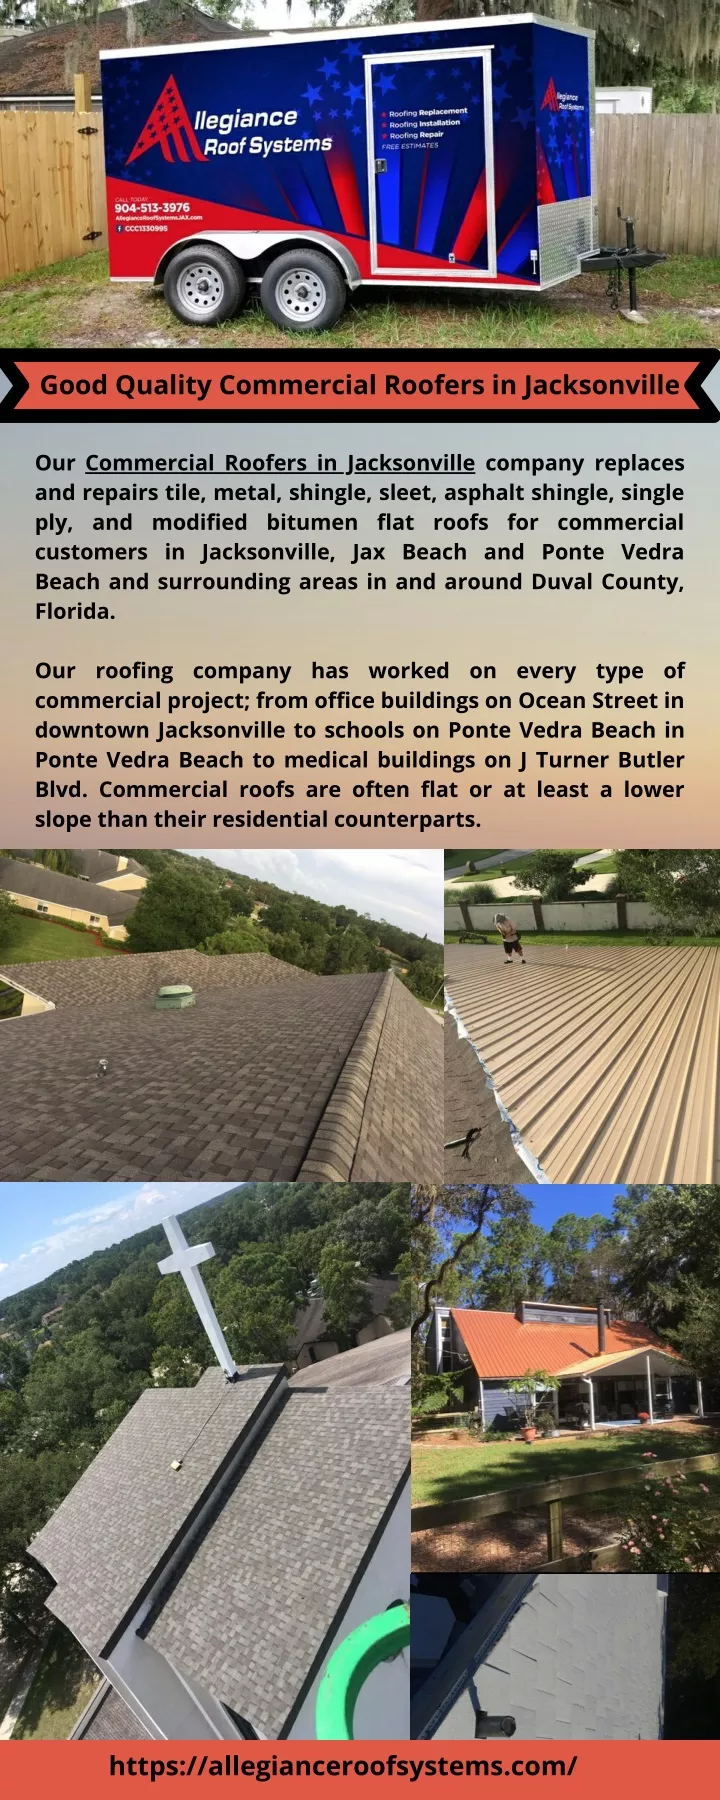 good quality commercial roofers in jacksonville